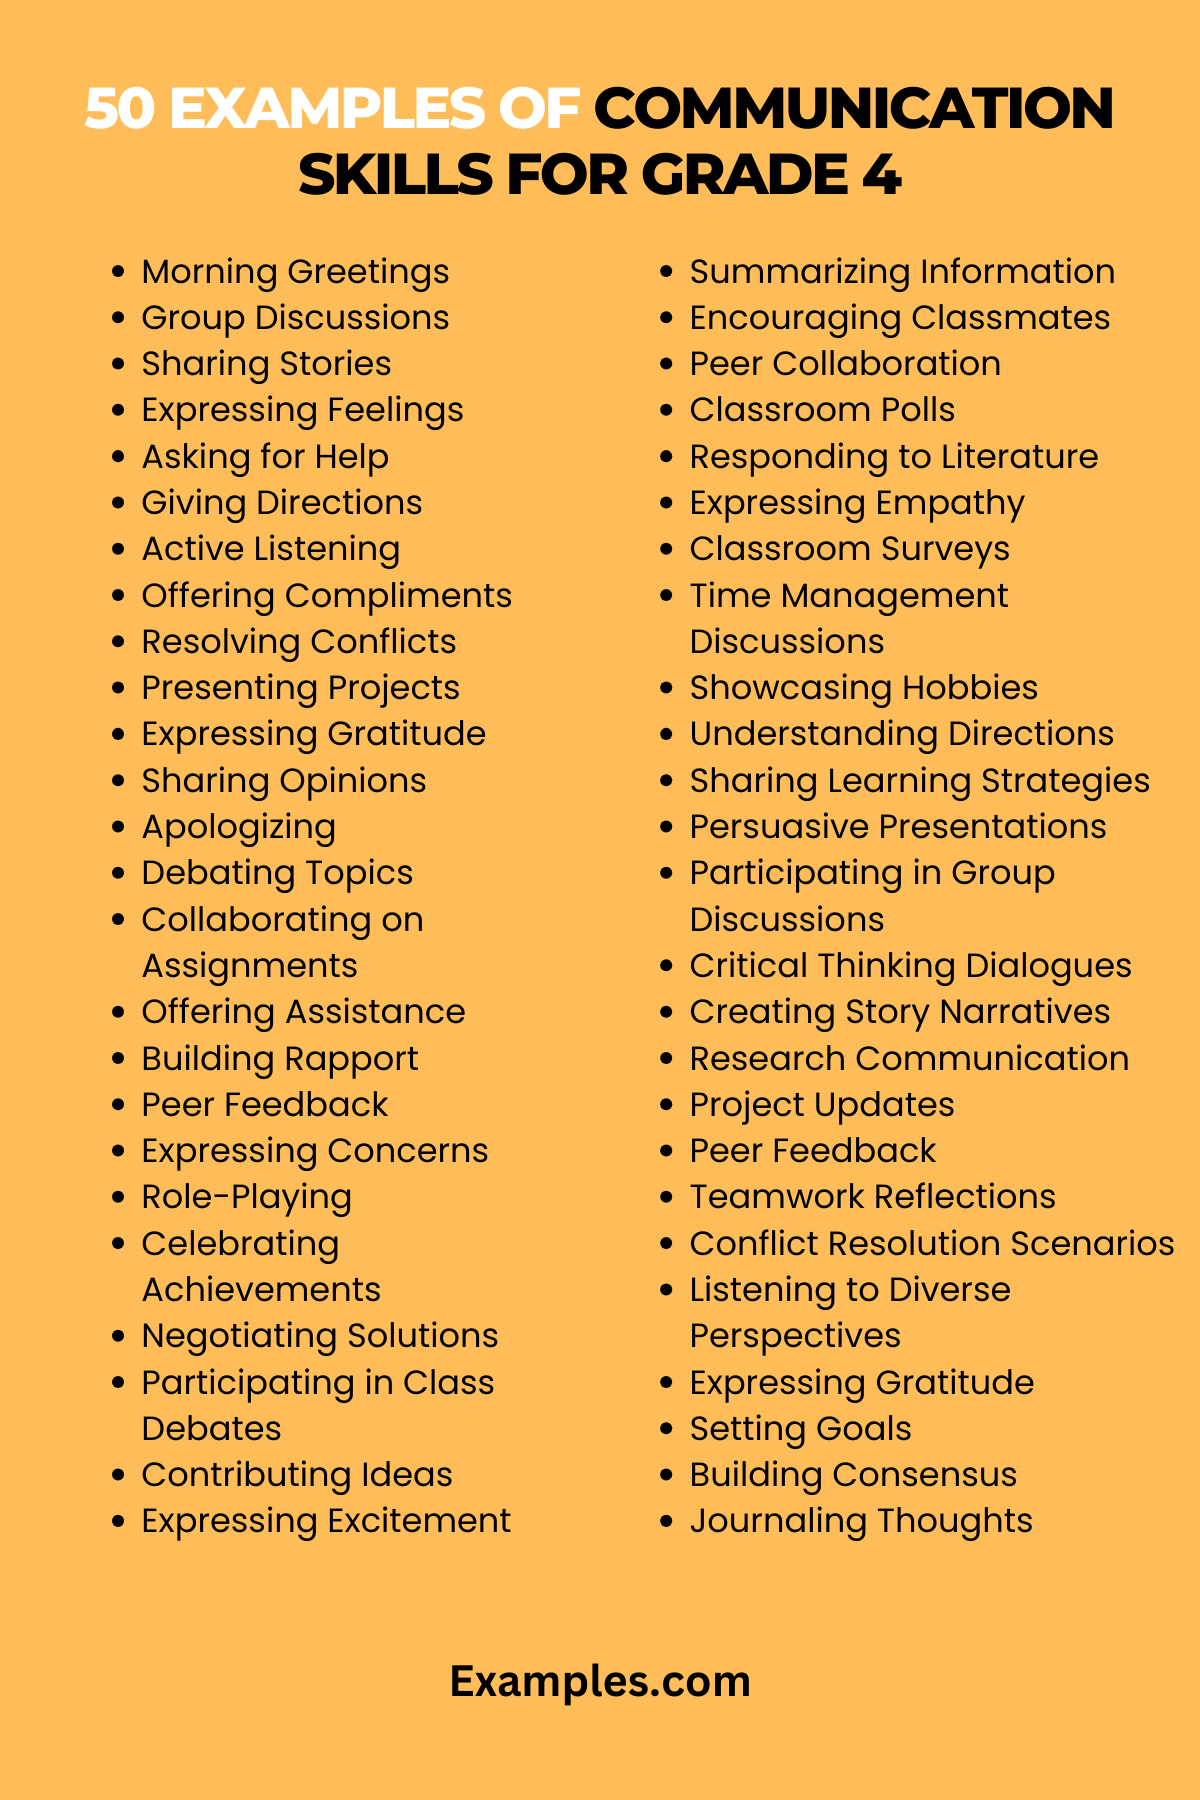 50 examples of communication skills for grade 3 3